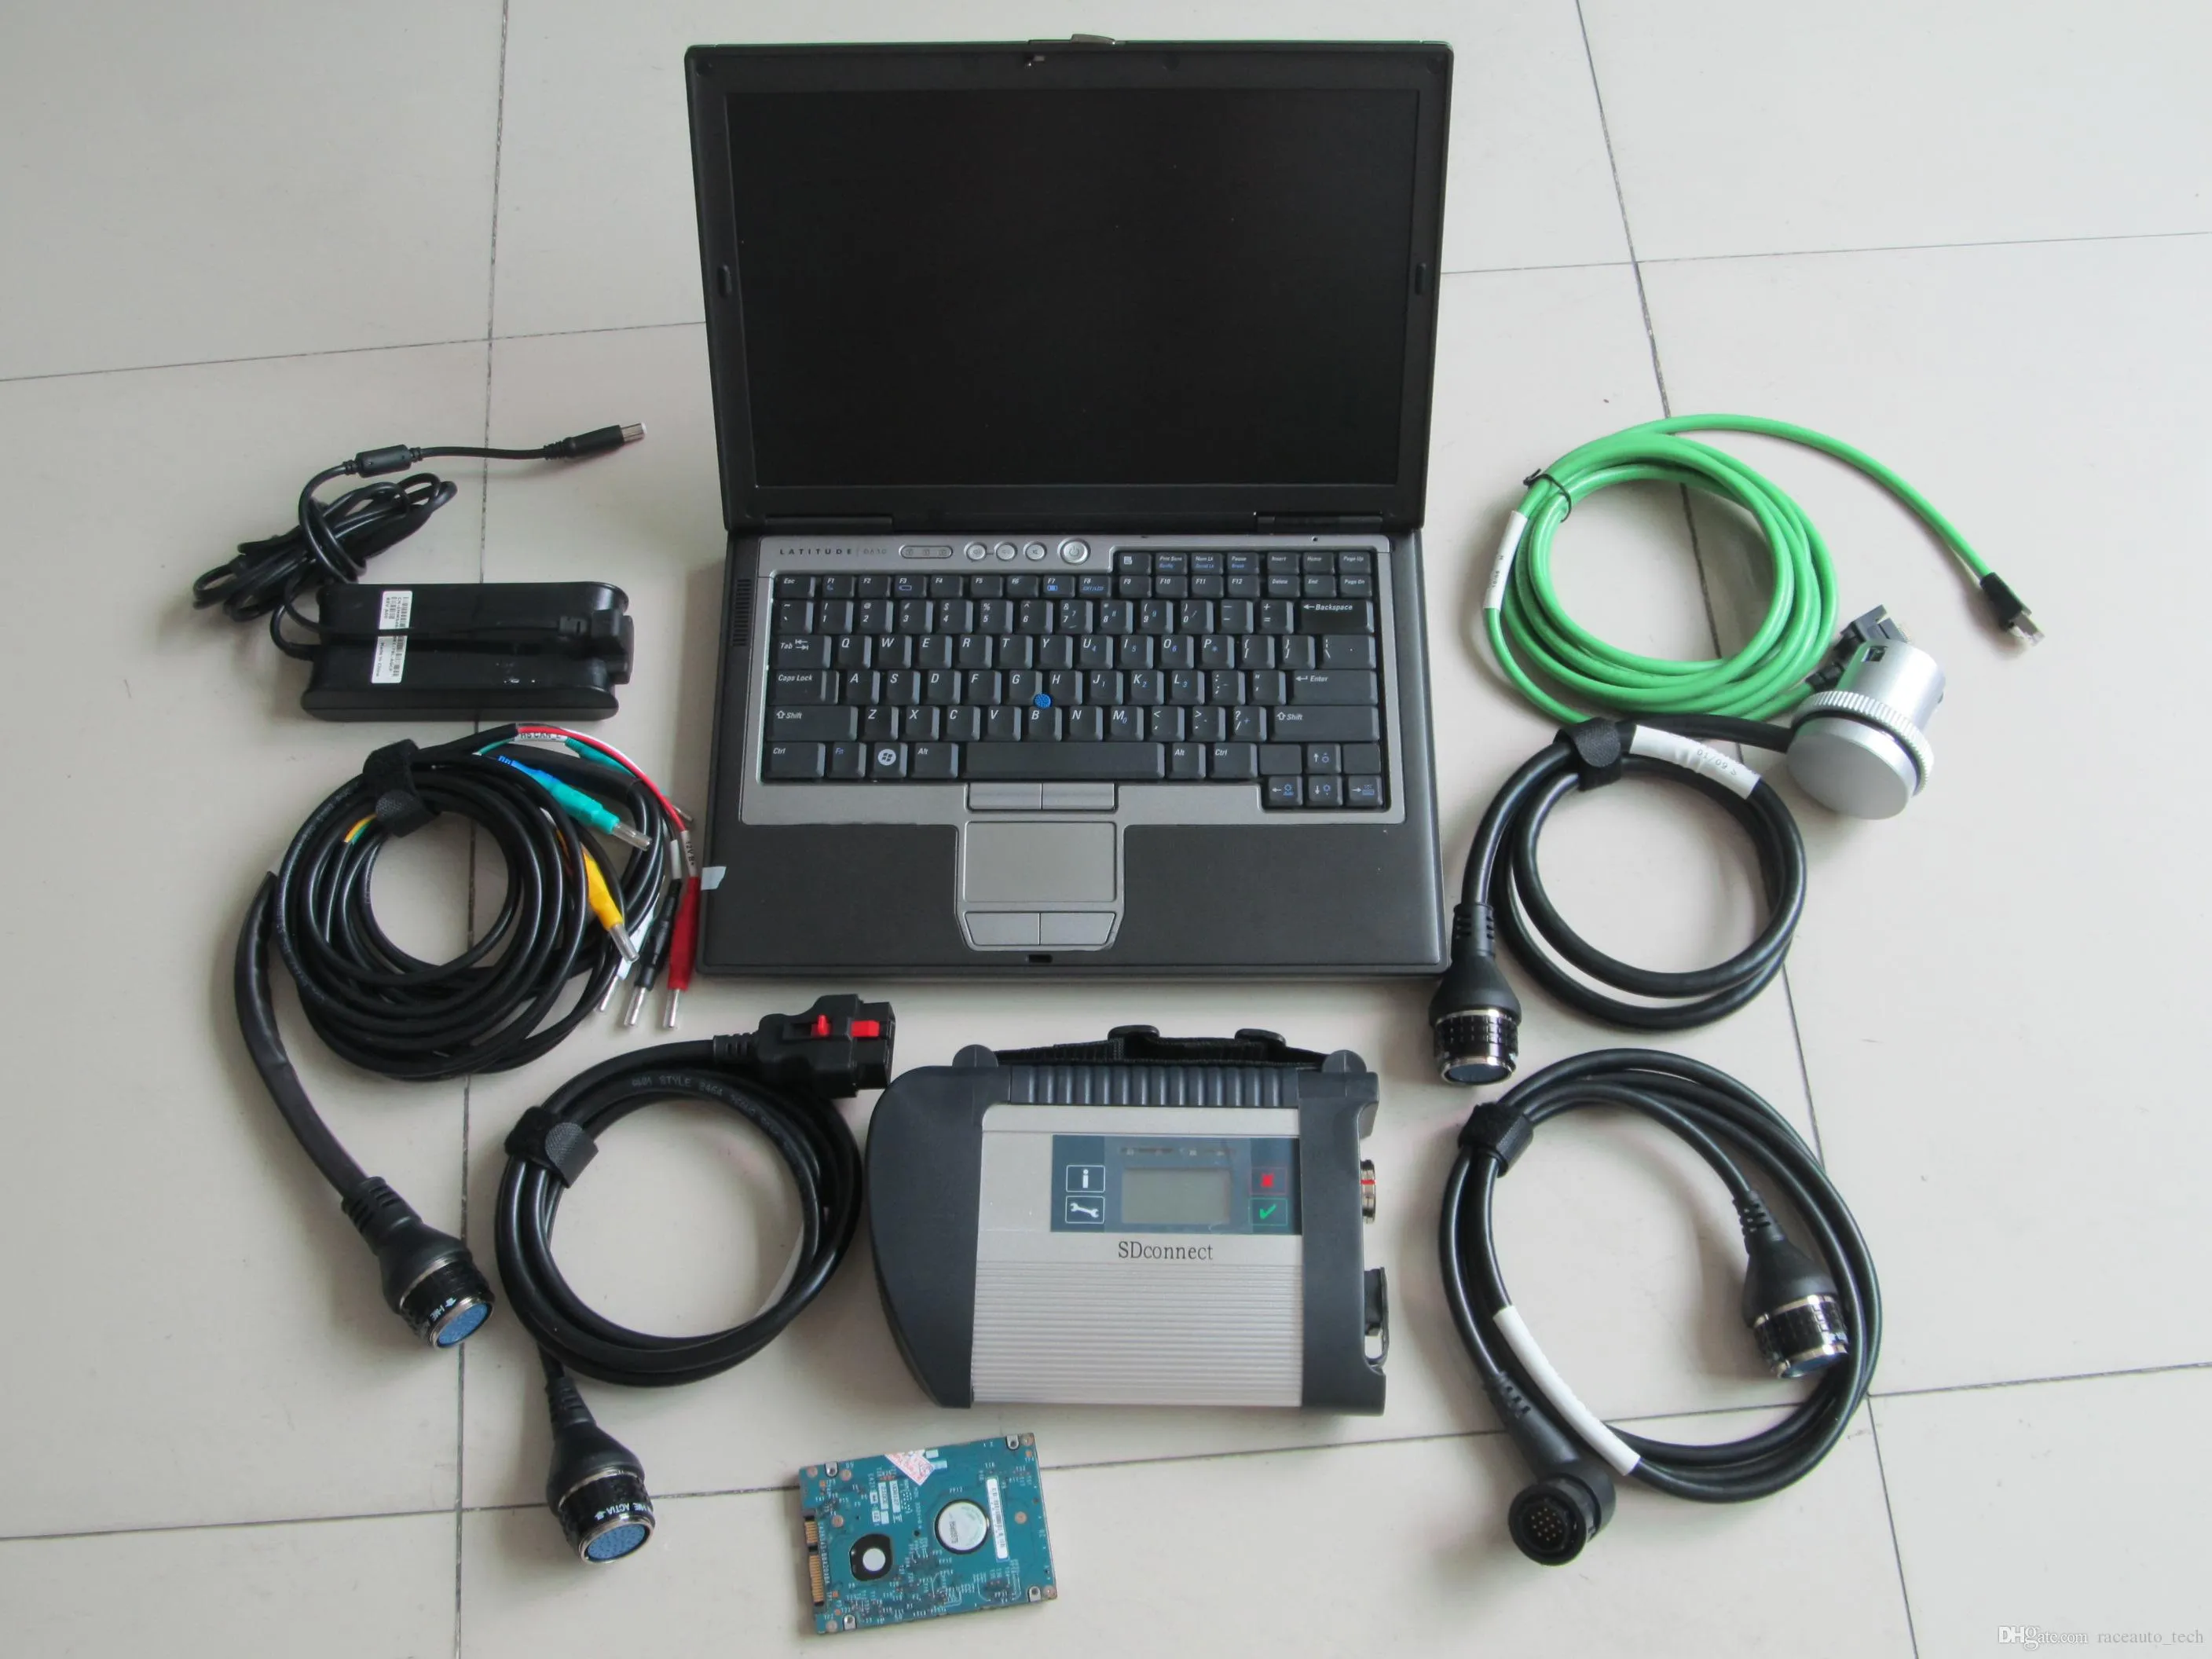 mb star diagnostic tool sd connect c4 hdd with laptop d630 computer cables full set ready to work